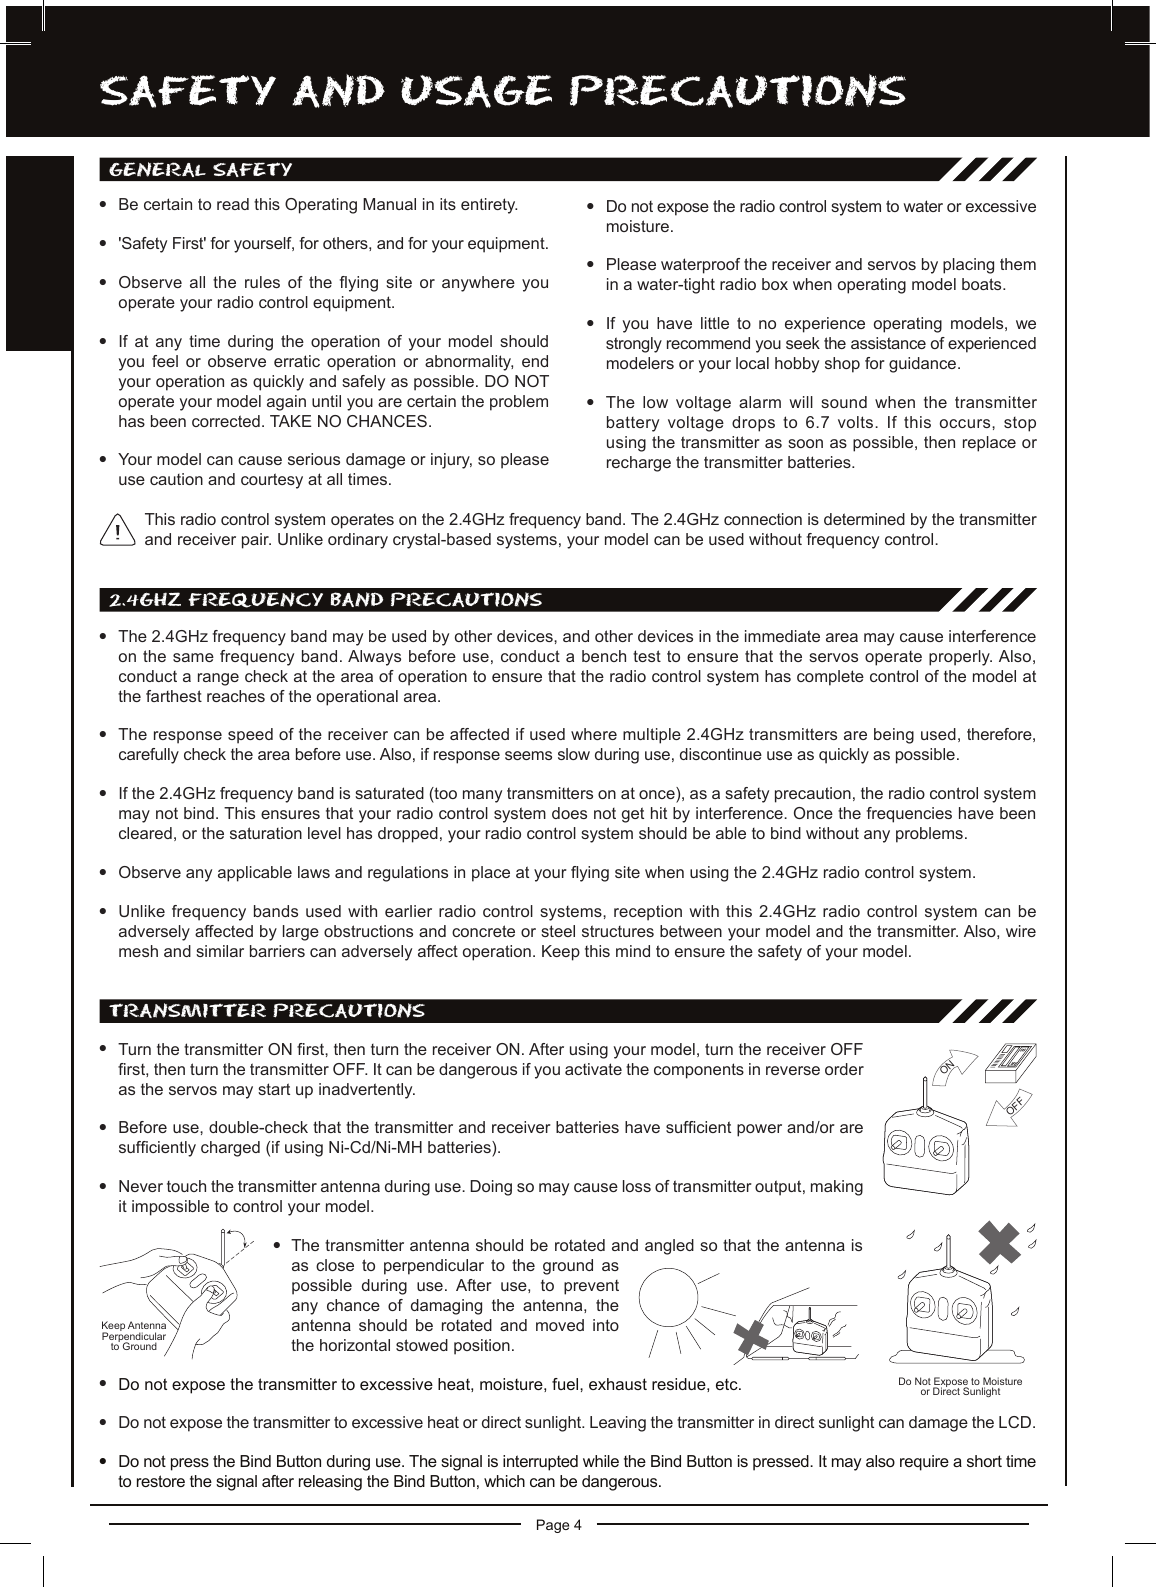 Page 4SaFETy anD USagE PREcaUTiOnSgEnERaL SaFETylBe certain to read this Operating Manual in its entirety.l&apos;Safety First&apos; for yourself, for others, and for your equipment.lObserve all the rules of the ying site or anywhere you operate your radio control equipment.lIf  at  any  time  during  the  operation  of  your  model  should you  feel  or  observe  erratic  operation  or  abnormality,  end your operation as quickly and safely as possible. DO NOToperate your model again until you are certain the problem has been corrected. TAKE NO CHANCES.lYour model can cause serious damage or injury, so please use caution and courtesy at all times.lDo not expose the radio control system to water or excessive moisture.lPlease waterproof the receiver and servos by placing them in a water-tight radio box when operating model boats.lIf  you  have  little  to  no  experience  operating  models,  we strongly recommend you seek the assistance of experienced modelers or your local hobby shop for guidance.lThe low voltage alarm will sound when the transmitter battery voltage drops to 6.7 volts. If this occurs, stop using the transmitter as soon as possible, then replace or recharge the transmitter batteries.TRanSMiTTER PREcaUTiOnSlTurn the transmitter ON rst, then turn the receiver ON. After using your model, turn the receiver OFF rst, then turn the transmitter OFF. It can be dangerous if you activate the components in reverse order as the servos may start up inadvertently.lBefore use, double-check that the transmitter and receiver batteries have sufcient power and/or are sufciently charged (if using Ni-Cd/Ni-MH batteries).lNever touch the transmitter antenna during use. Doing so may cause loss of transmitter output, making it impossible to control your model.lThe transmitter antenna should be rotated and angled so that the antenna is as  close  to  perpendicular  to  the  ground  as possible  during  use.  After  use,  to  prevent any  chance  of  damaging  the  antenna,  the antenna  should  be  rotated  and  moved  into the horizontal stowed position.lDo not expose the transmitter to excessive heat, moisture, fuel, exhaust residue, etc.lDo not expose the transmitter to excessive heat or direct sunlight. Leaving the transmitter in direct sunlight can damage the LCD.lDo not press the Bind Button during use. The signal is interrupted while the Bind Button is pressed. It may also require a short time to restore the signal after releasing the Bind Button, which can be dangerous.ONOFFKeep AntennaPerpendicularto GroundDo Not Expose to Moistureor Direct Sunlight2.4ghz FREqUEncy BanD PREcaUTiOnSlThe 2.4GHz frequency band may be used by other devices, and other devices in the immediate area may cause interference on the same frequency band. Always before use, conduct a bench test to ensure that the servos operate properly. Also, conduct a range check at the area of operation to ensure that the radio control system has complete control of the model at the farthest reaches of the operational area.lThe response speed of the receiver can be affected if used where multiple 2.4GHz transmitters are being used, therefore, carefully check the area before use. Also, if response seems slow during use, discontinue use as quickly as possible.lIf the 2.4GHz frequency band is saturated (too many transmitters on at once), as a safety precaution, the radio control system may not bind. This ensures that your radio control system does not get hit by interference. Once the frequencies have been cleared, or the saturation level has dropped, your radio control system should be able to bind without any problems.lObserve any applicable laws and regulations in place at your ying site when using the 2.4GHz radio control system.lUnlike frequency bands used with earlier radio control systems, reception with this 2.4GHz radio control system can be adversely affected by large obstructions and concrete or steel structures between your model and the transmitter. Also, wire mesh and similar barriers can adversely affect operation. Keep this mind to ensure the safety of your model.This radio control system operates on the 2.4GHz frequency band. The 2.4GHz connection is determined by the transmitter and receiver pair. Unlike ordinary crystal-based systems, your model can be used without frequency control.